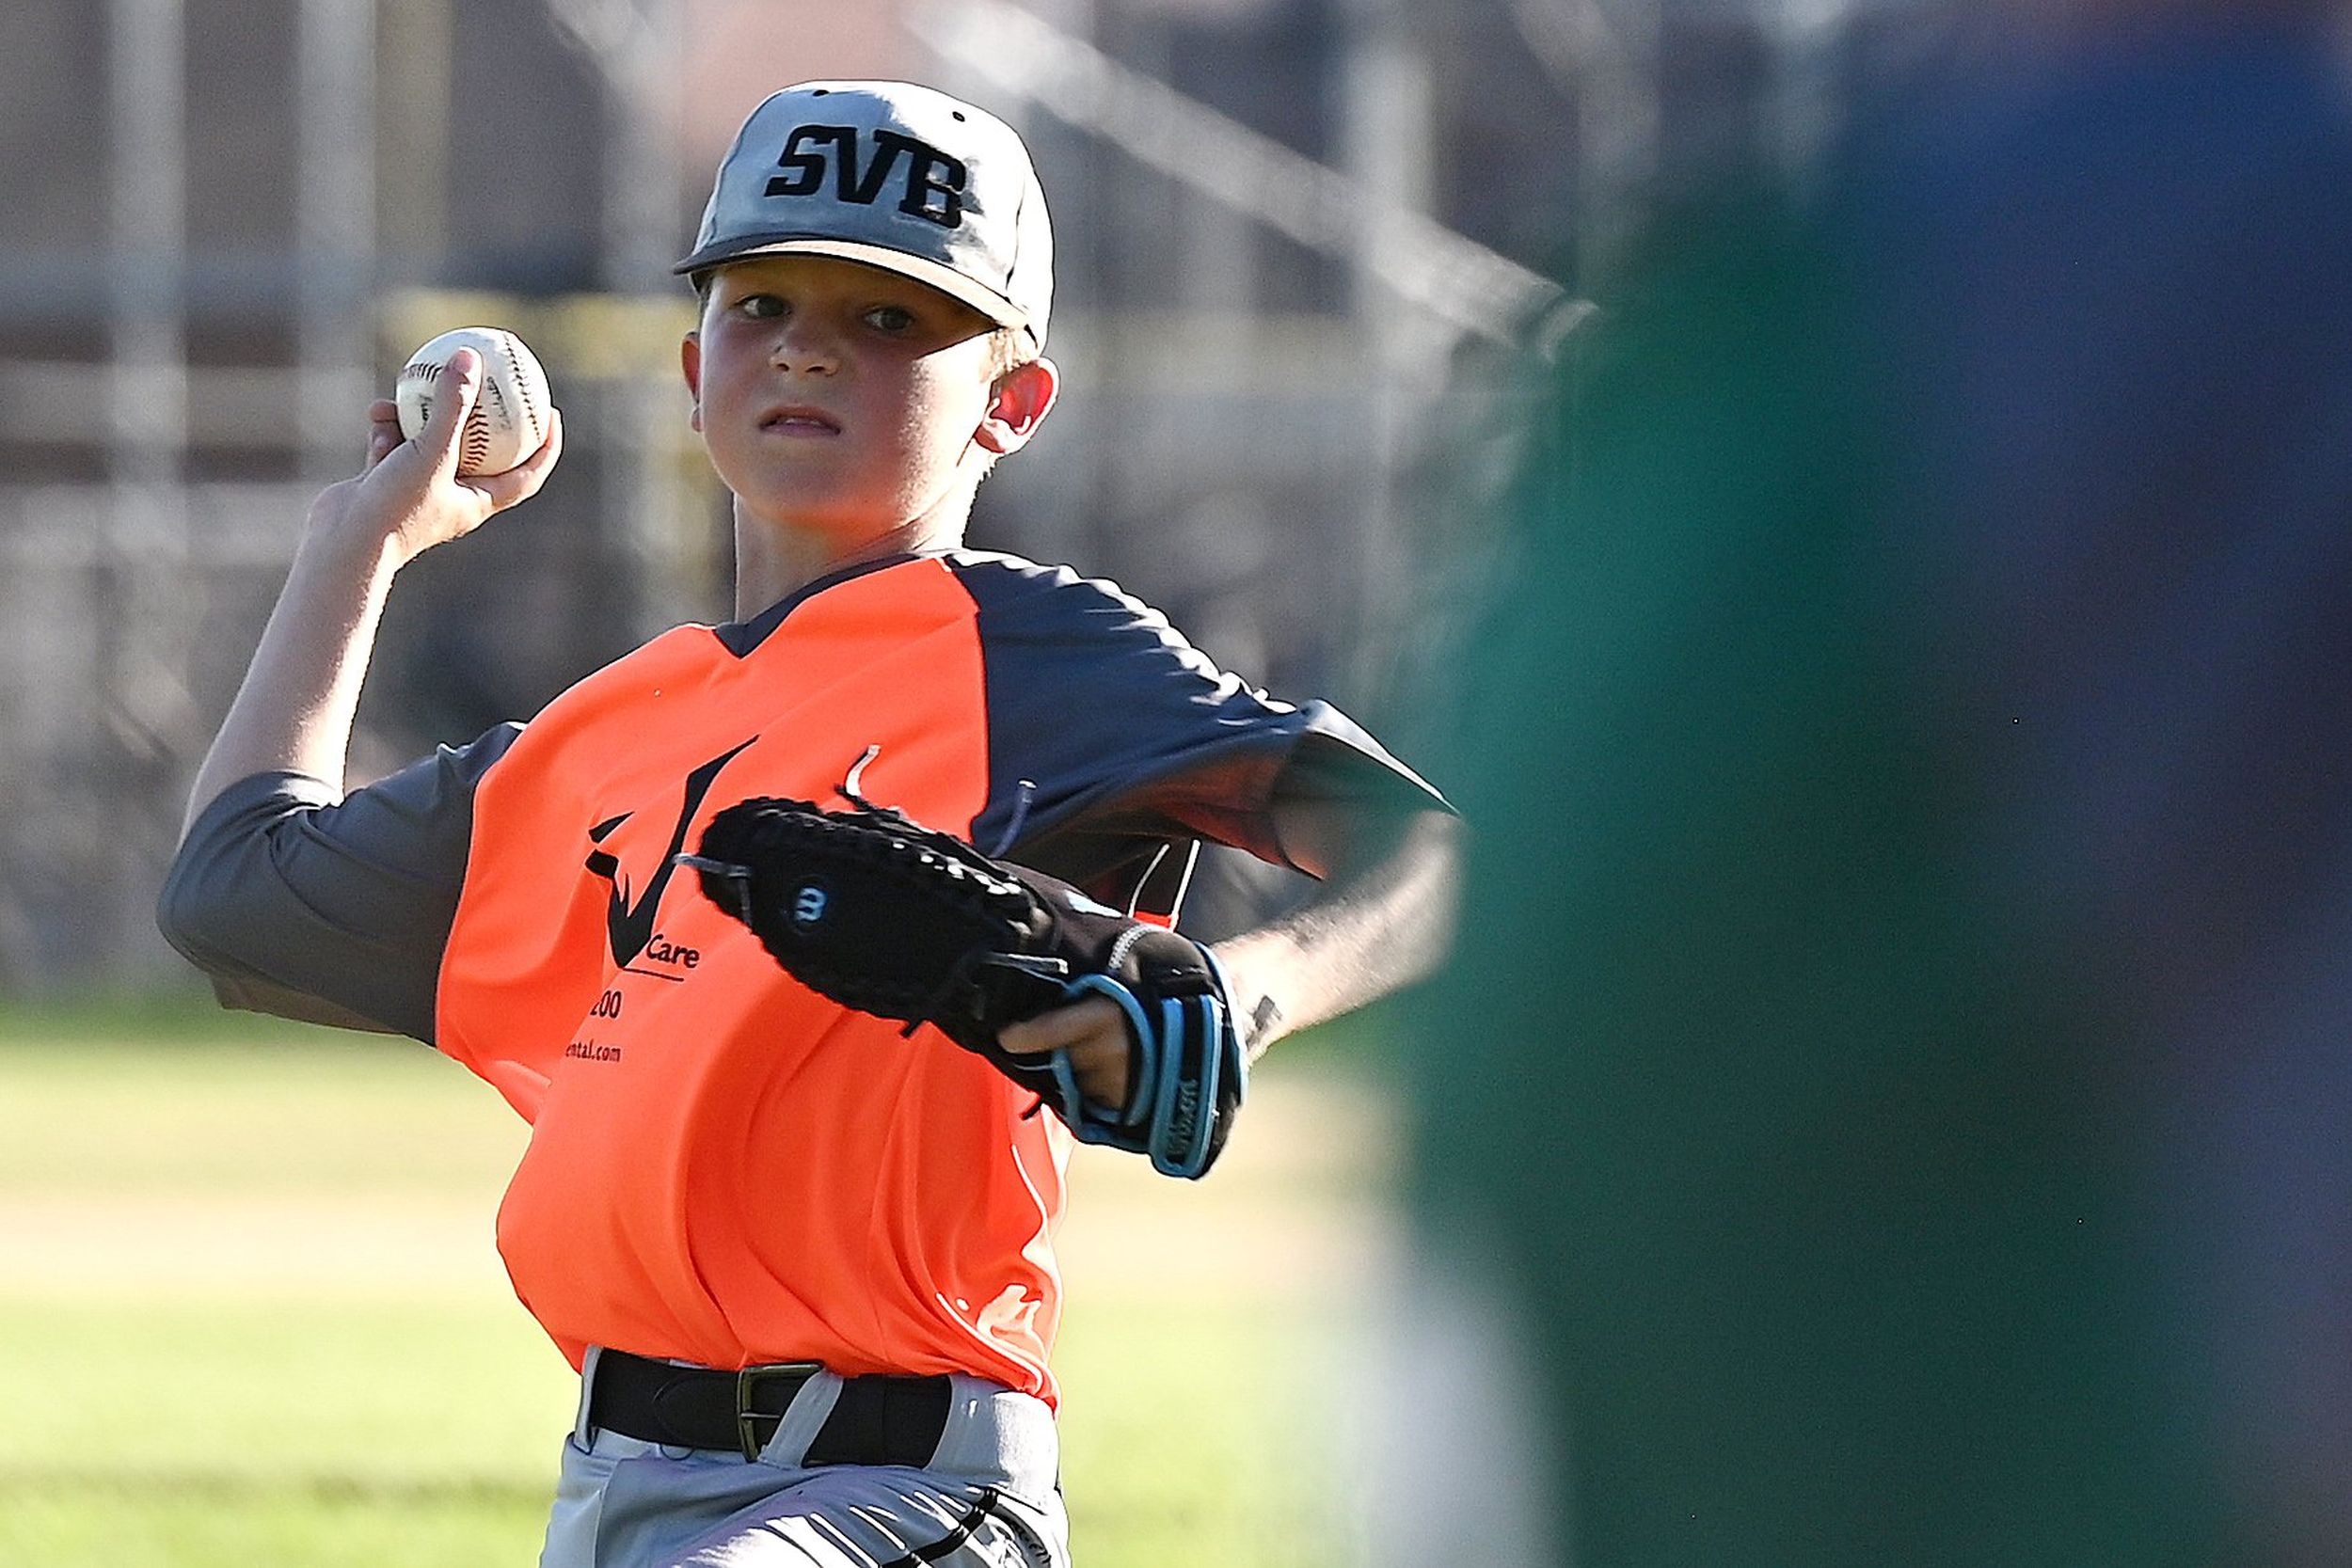 Why we need youth baseball now more than ever